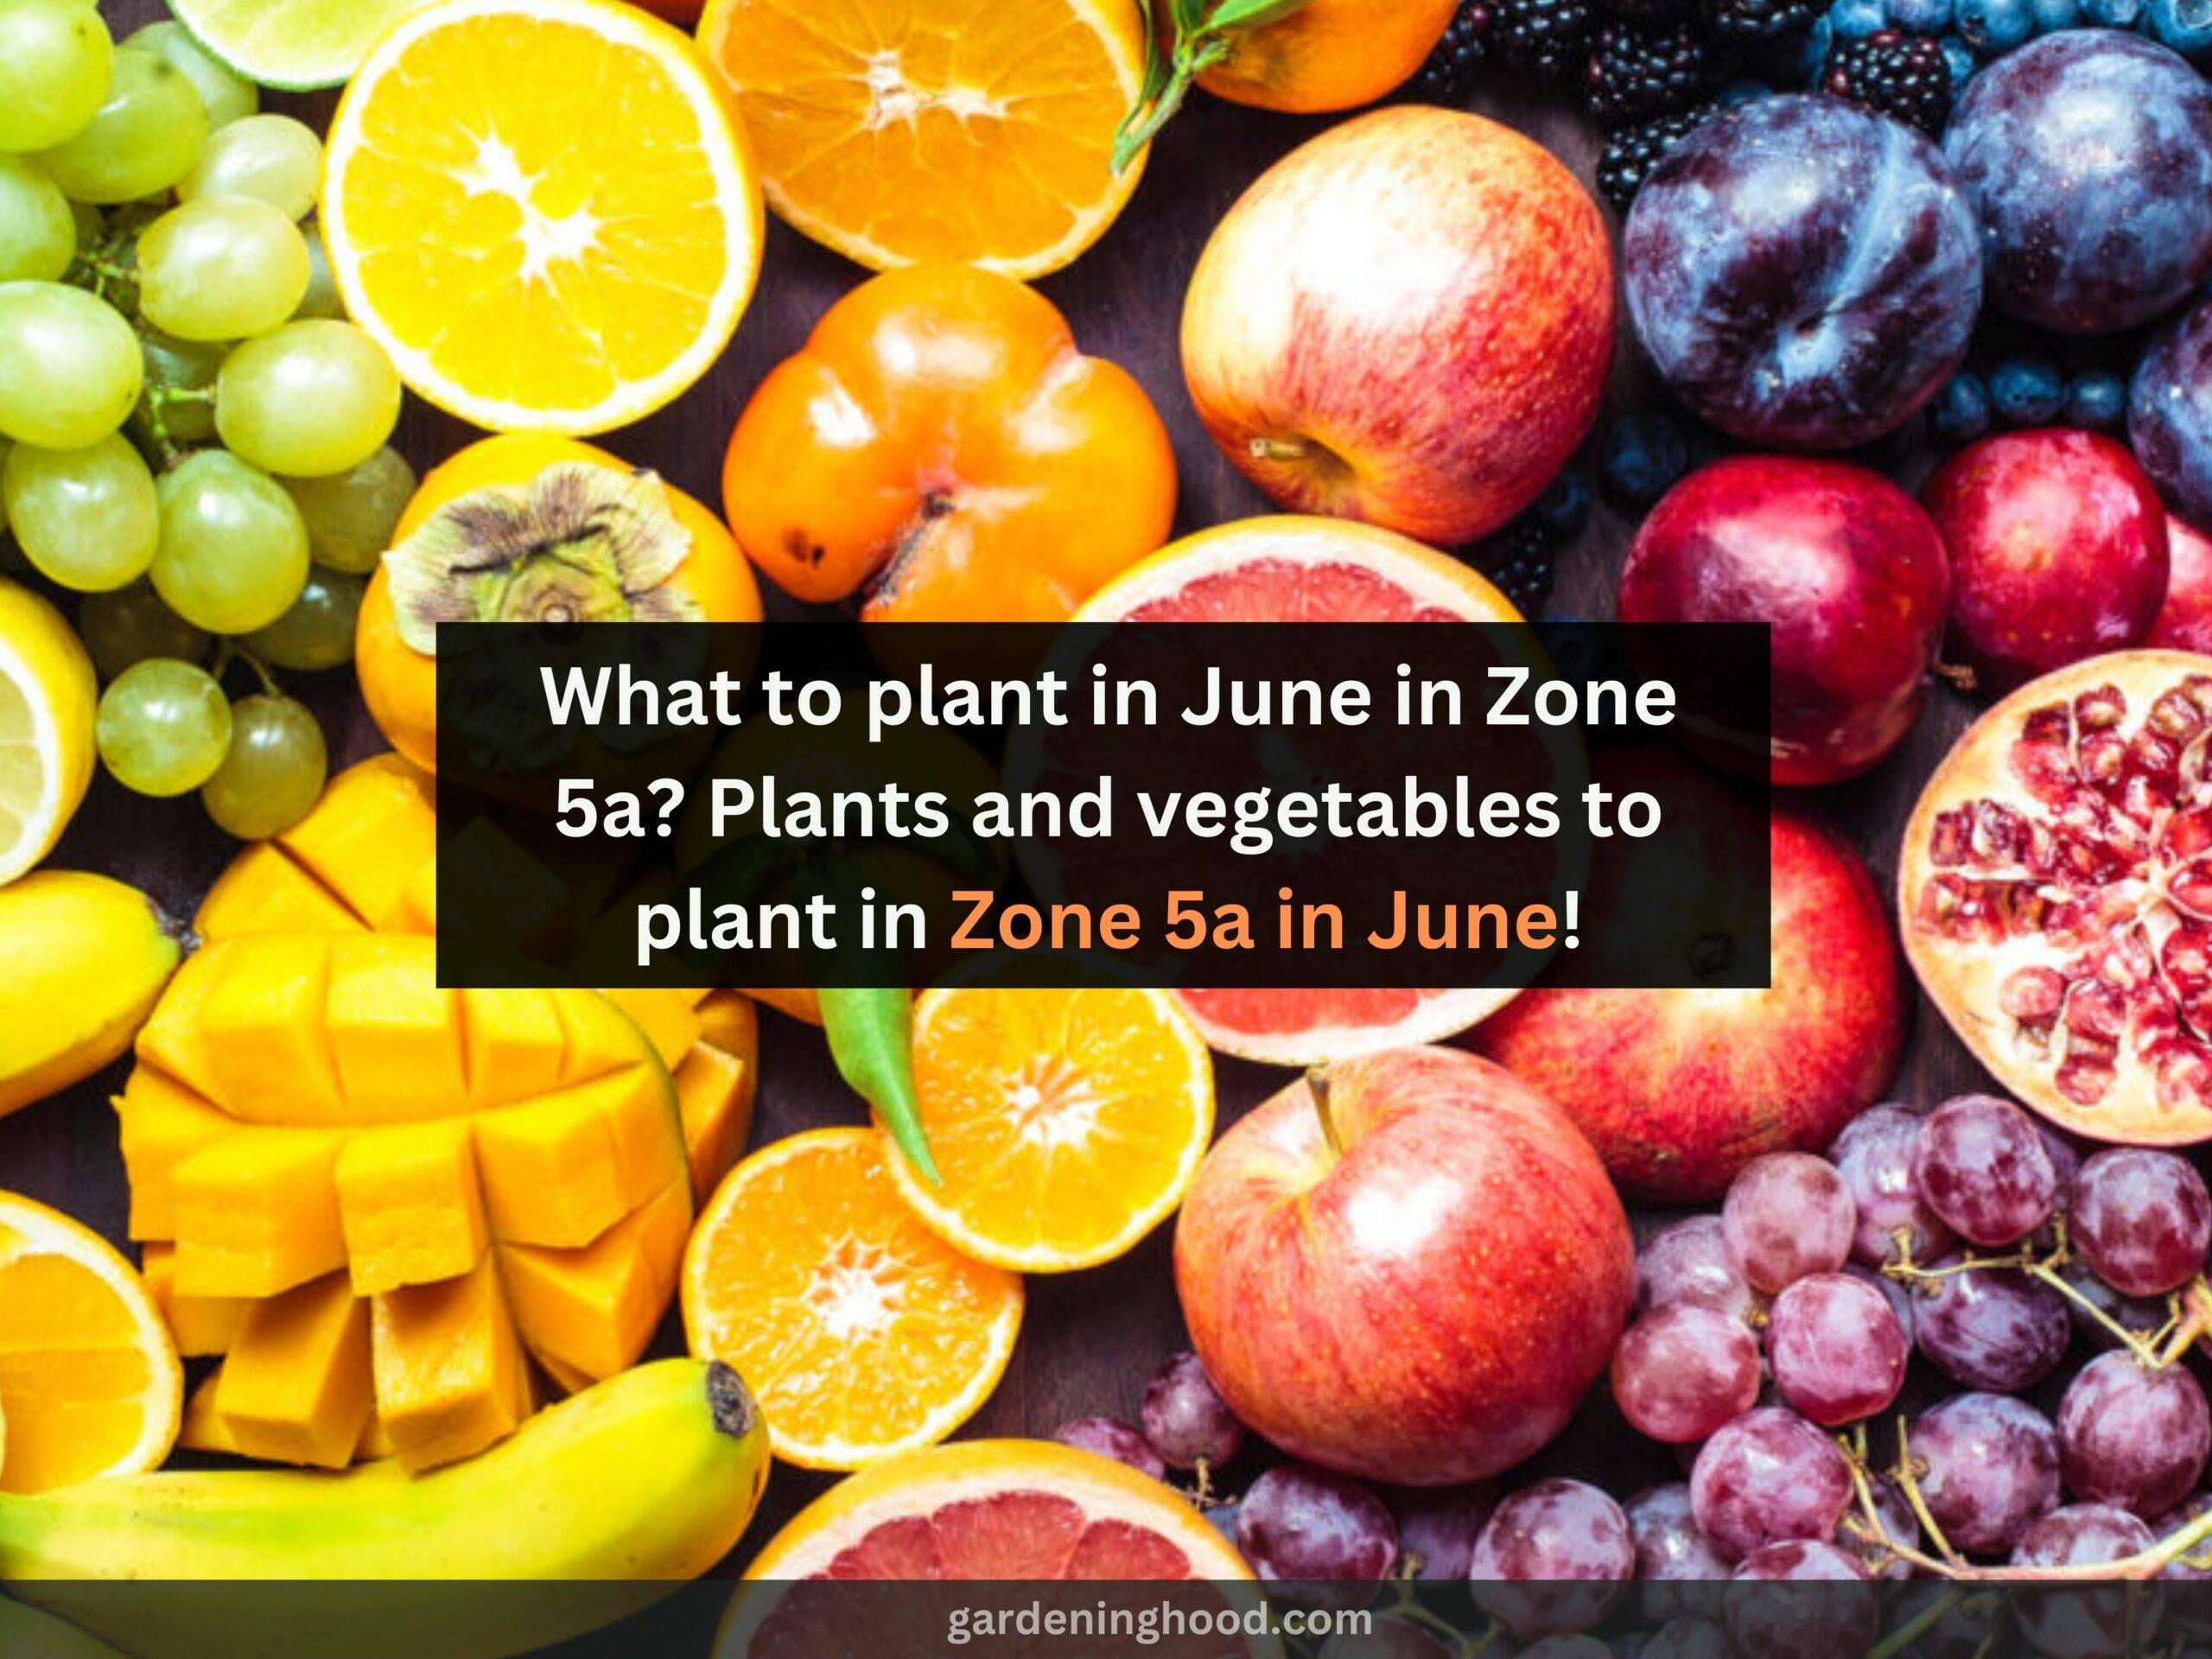 What to plant in June in Zone 5a? Plants and vegetables to plant in Zone 5a in June!